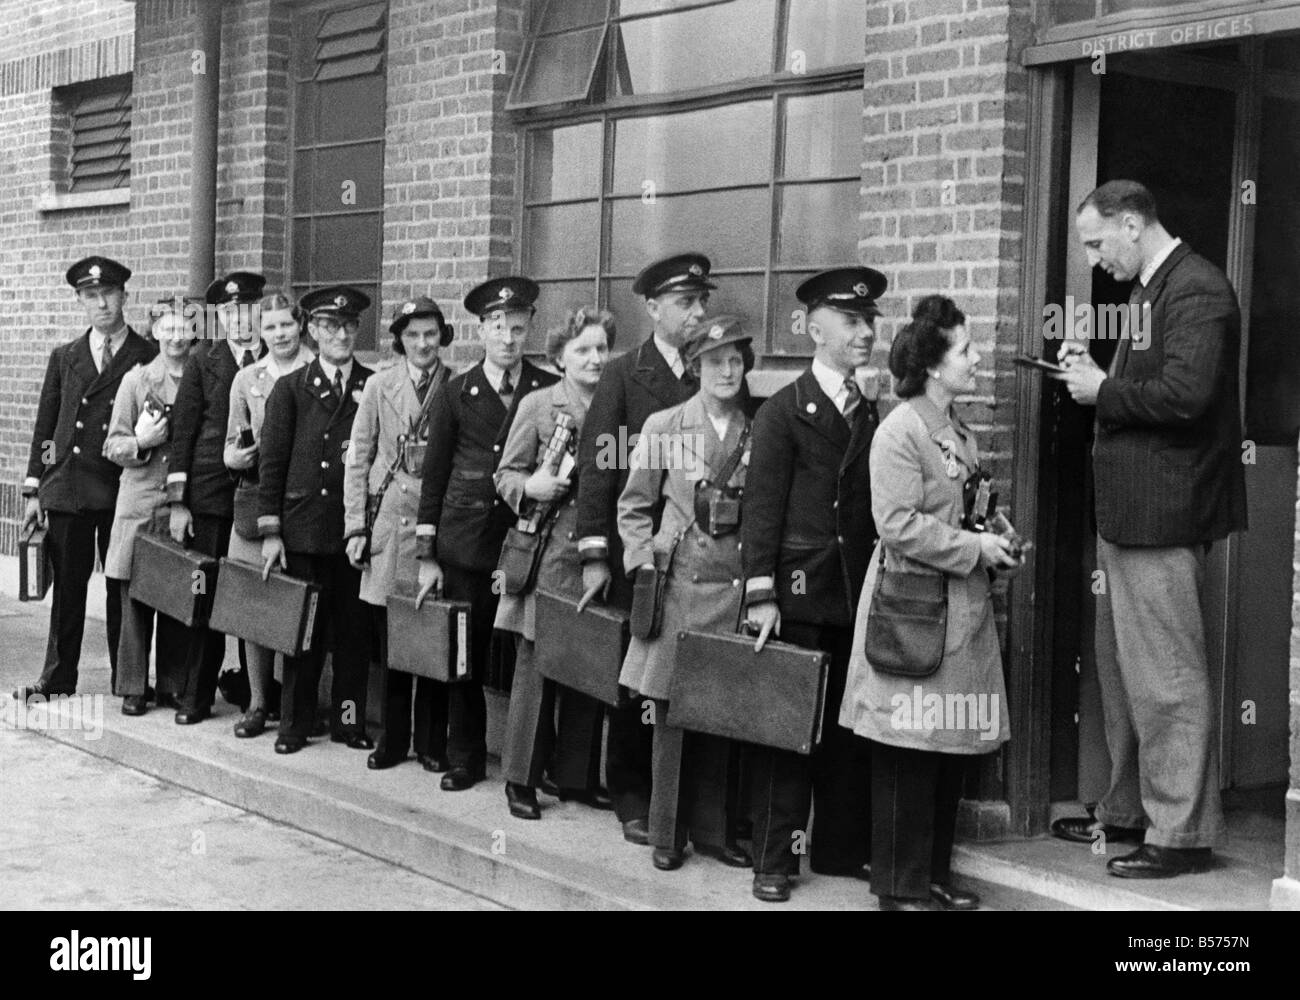 Husband and wife bus crews check in at the depot at North Fleet. From right to left: Mr. and Mrs. William Reader, Mr. and Mrs. Walter Coole, Mr. and Mrs. Fred Annal, Mr. and Mrs. Ernest Fifield, Mr. and Mrs. James Nolan, Mr. and Mrs. John Cox. May 1944 P010126 Stock Photo